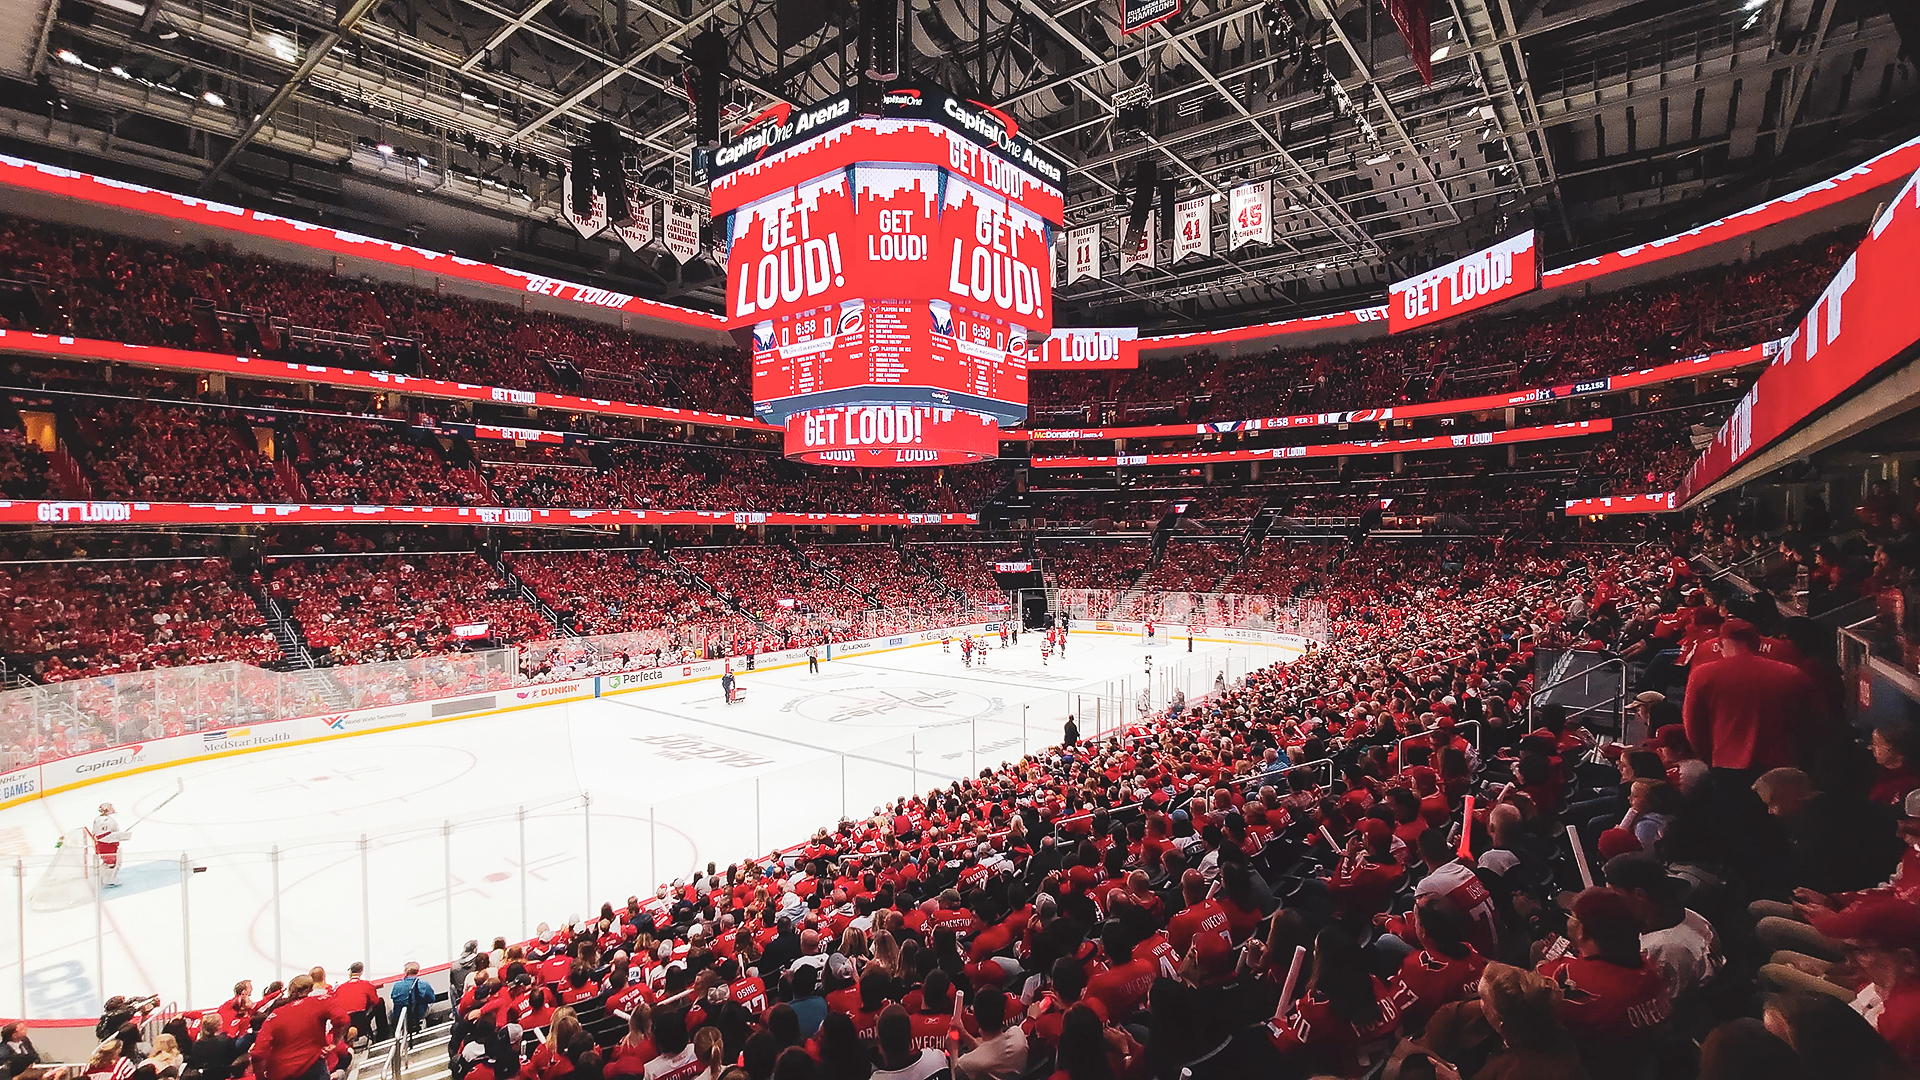 Capital One Arena Tickets & Events